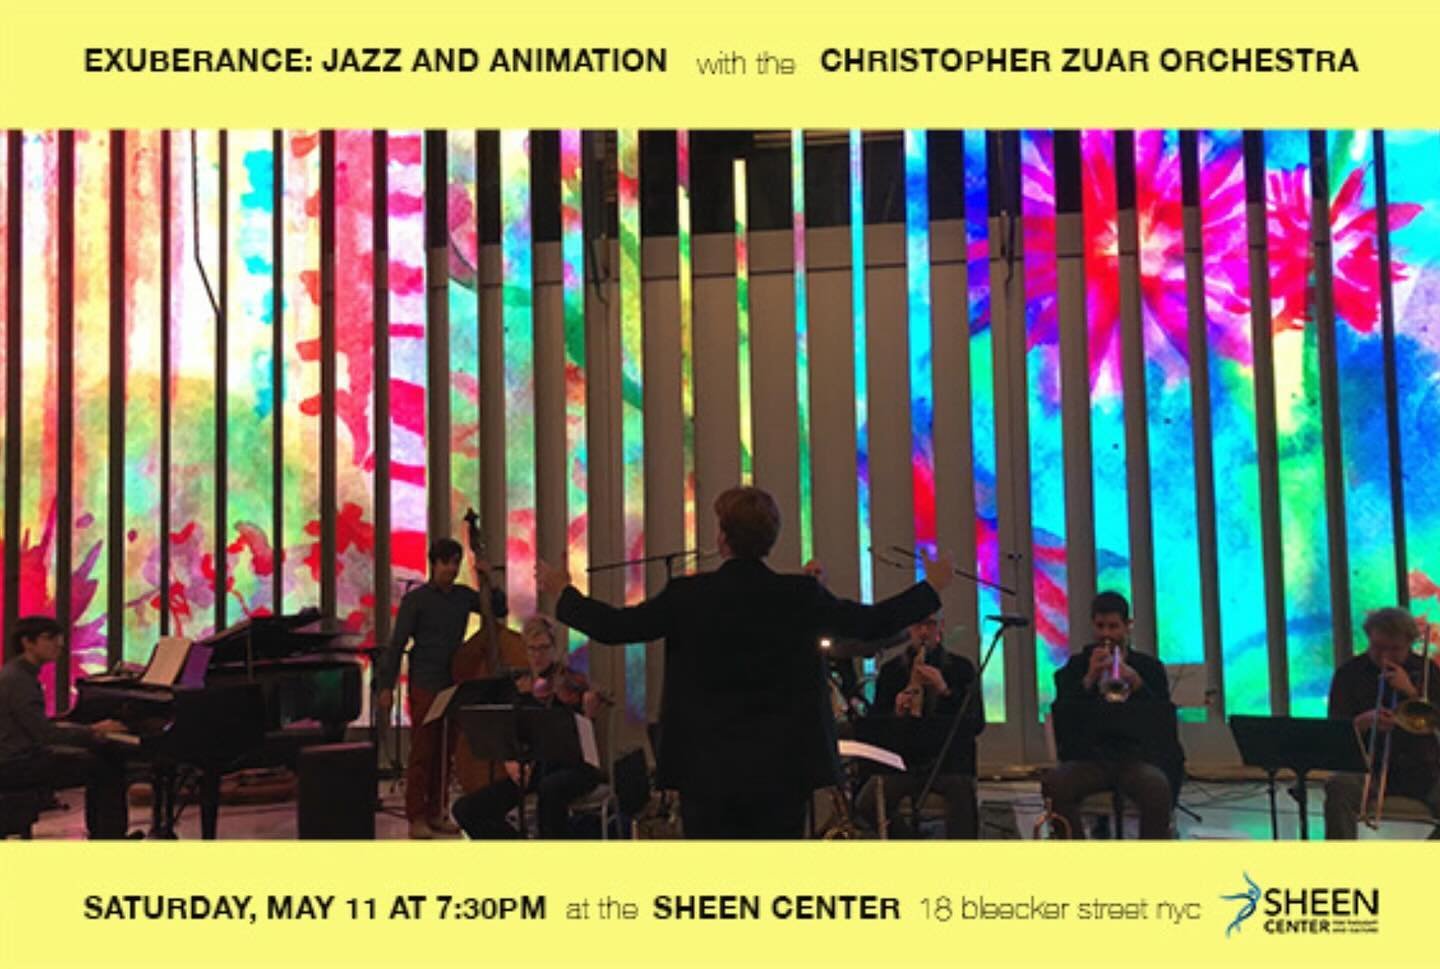 I&rsquo;m looking forward to playing with Christopher Zuar this Saturday night at the Sheen Center. Great music from his new release, with an amazing band!! Tickets available!!
&bull;
&bull;
#jazzorchestra #newmusic #jazzcomposer #livemusic #jeffnels